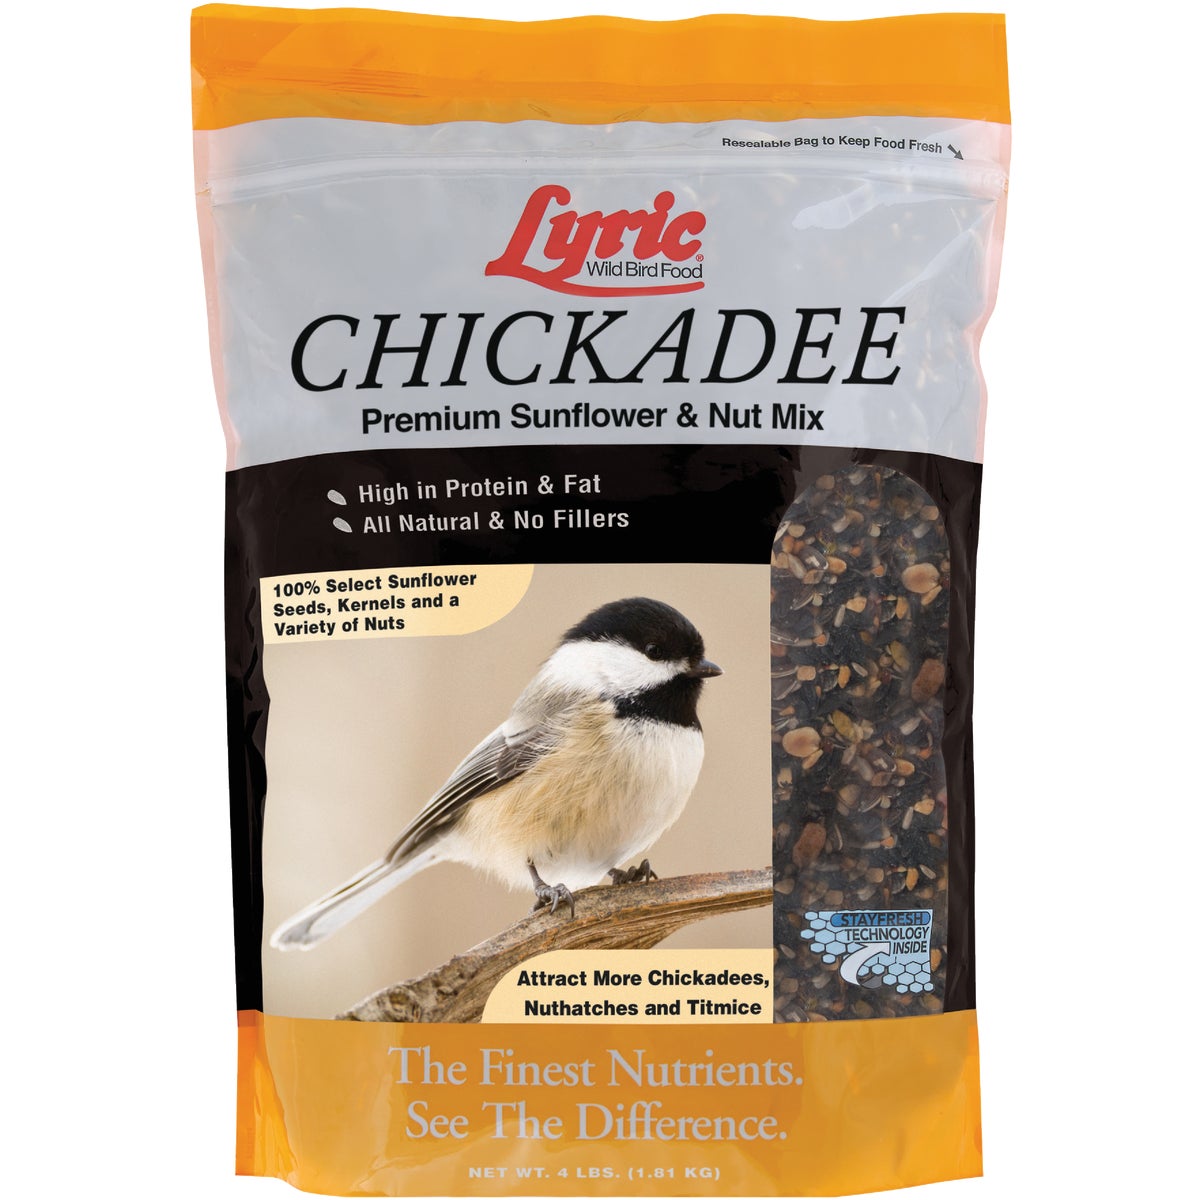 Item 701855, Quality bird seed mix that will attract chickadees, but can also bring 